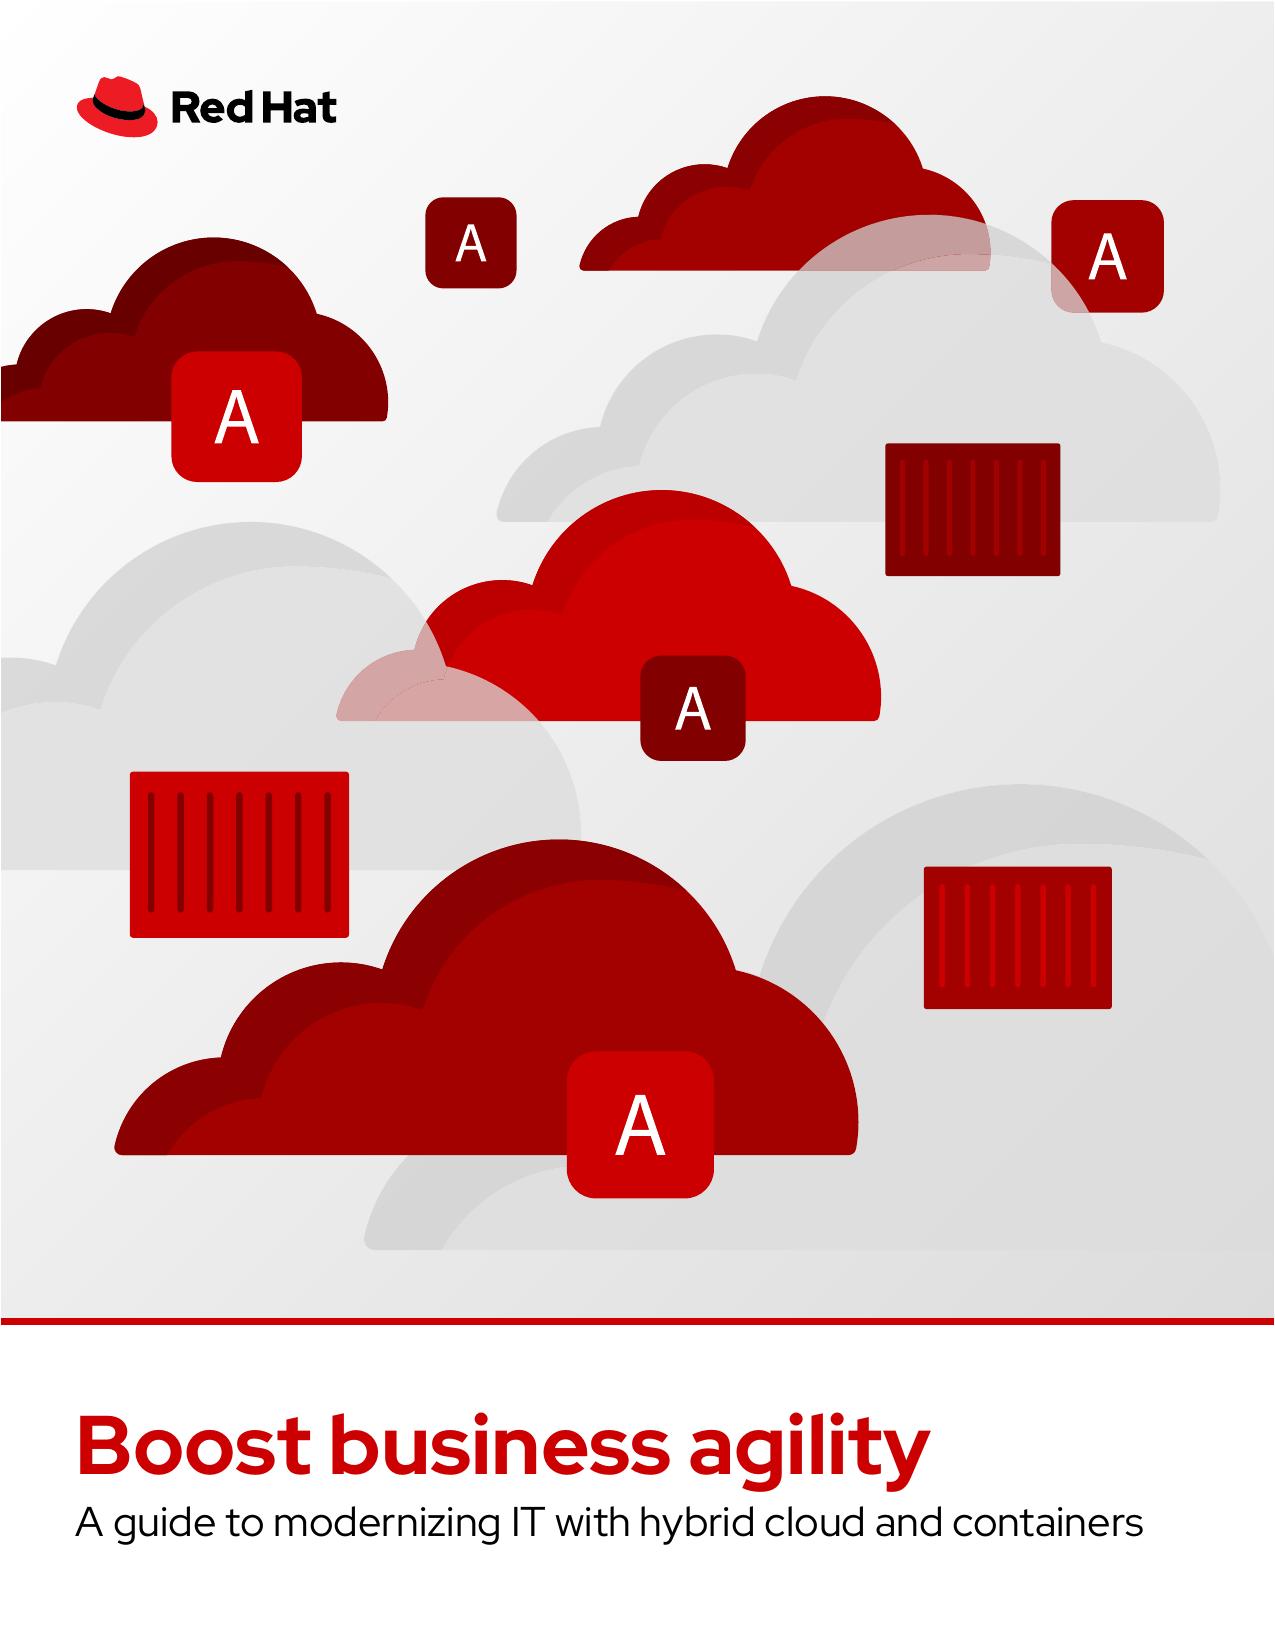 Boost Business Agility - A Guide to Modernizing IT & Hybrid Cloud & Containers